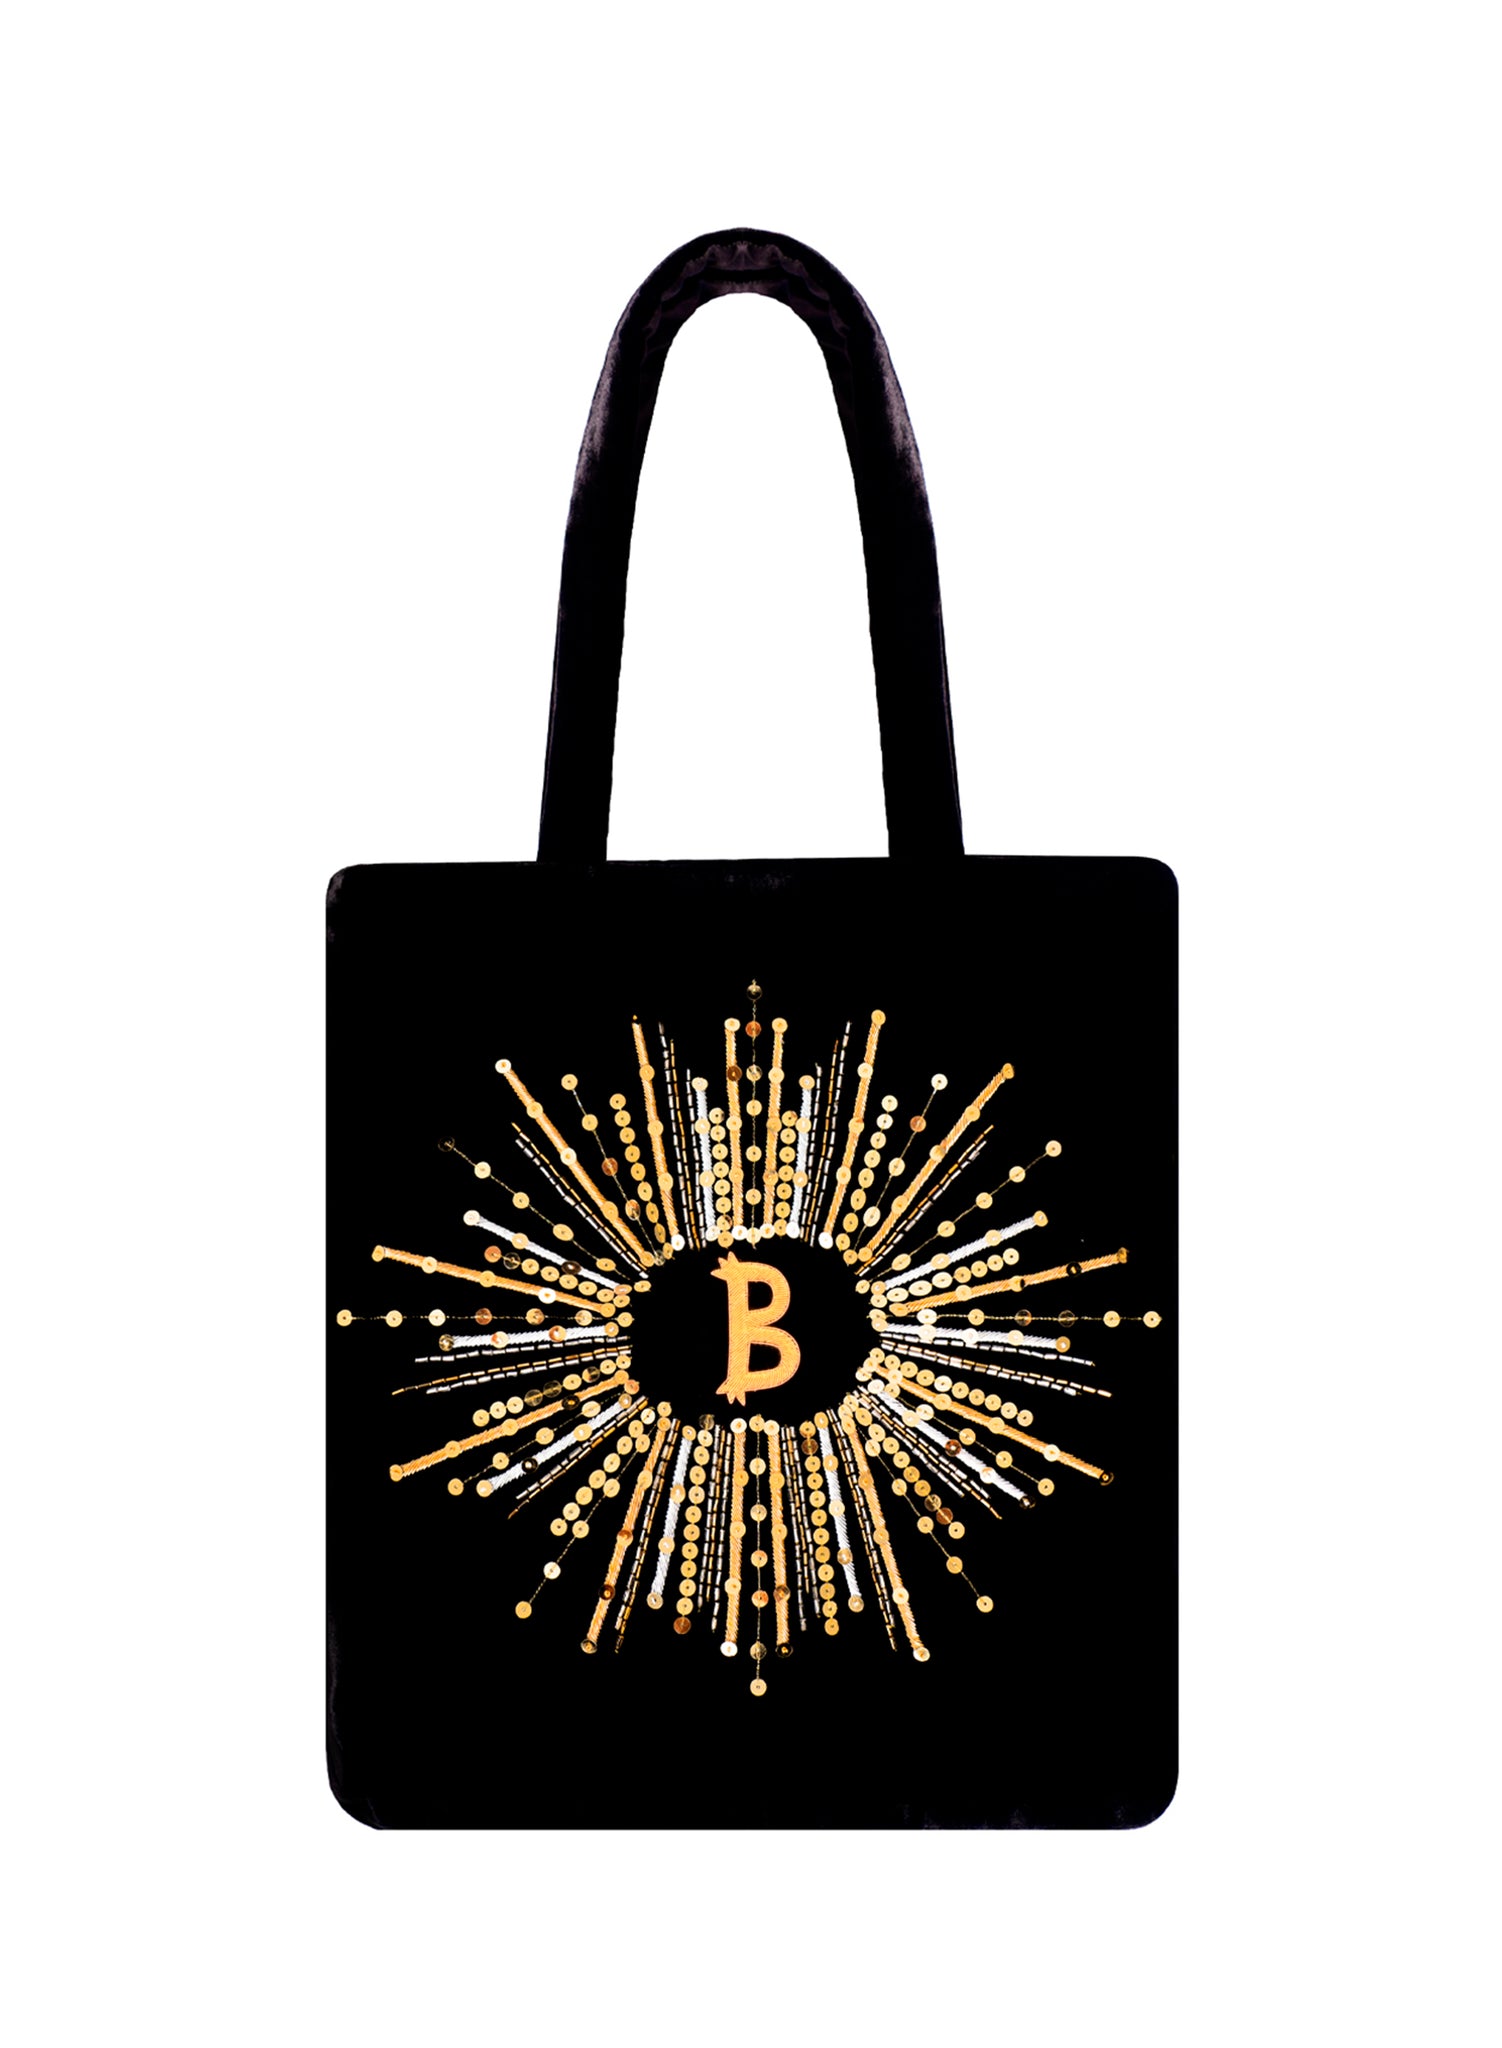 Personalized Canvas Tote Bag, Initial Tote, 3 Sizes To choose from